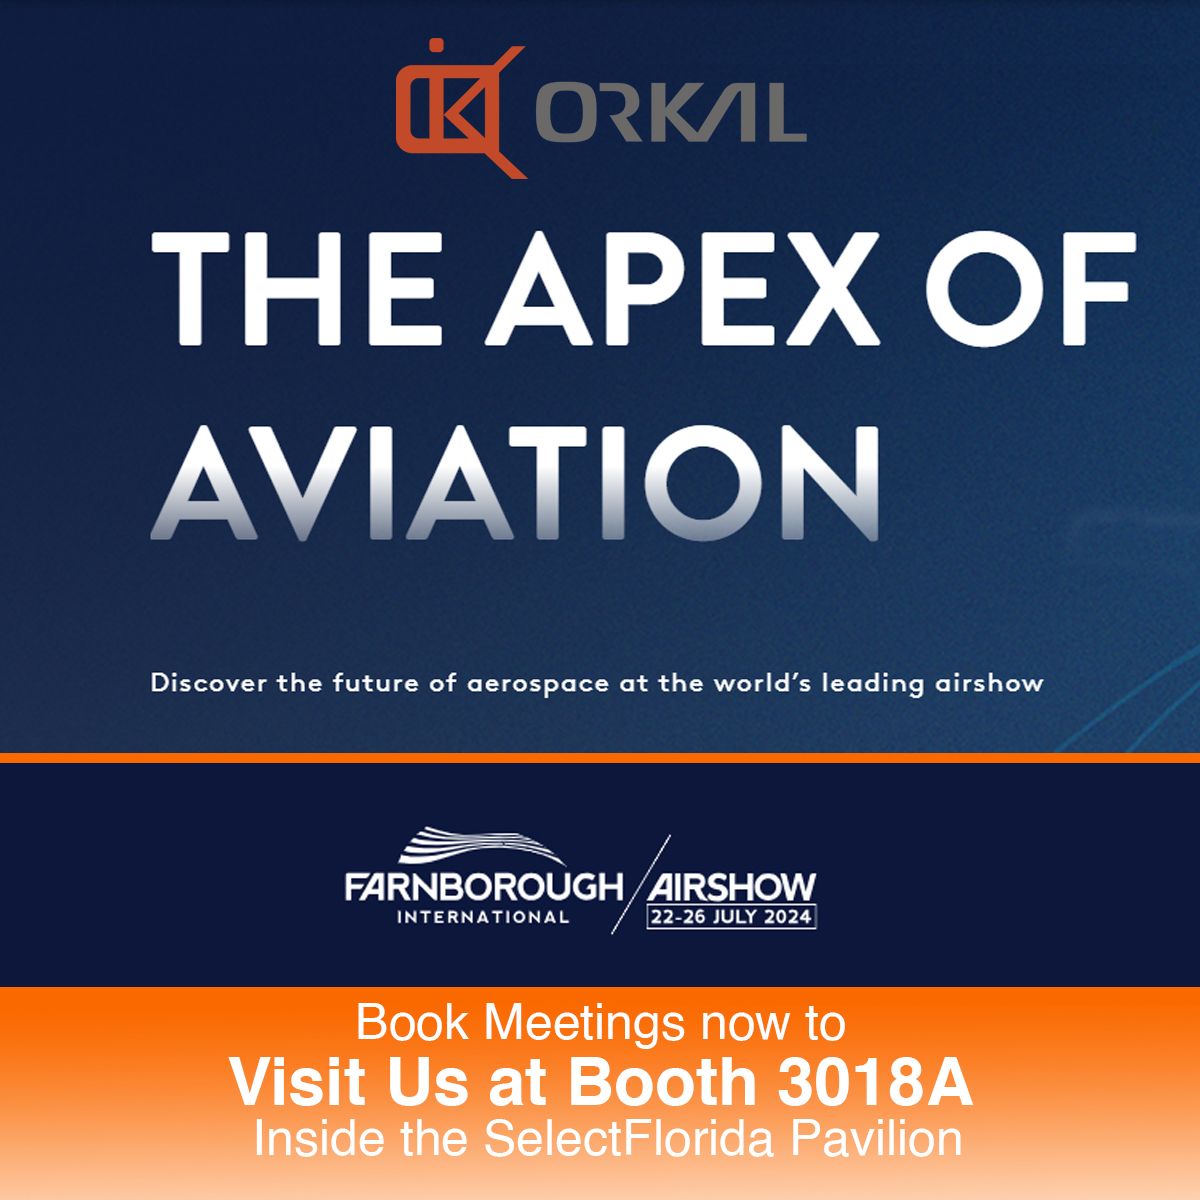 orkal, ### the apex of aviation

join orkal industries at the farnborough international airshow, july 22-26, 2024.

---

explore our premium aircraft fittings and precision tooling designs.

---

discover advanced repair solutions and comprehensive logistic support tailored for aerospace needs. 

---

learn about our aerospace quality assembly solutions and fluid transfer systems.

---

optimize your supply chain with orkal industries' expertise in compliant, aircraft-grade components.

---

meet us at mro americas from april 9-11, 2024. 

booth 3018a in the selectflorida pavilion. book your meetings now!